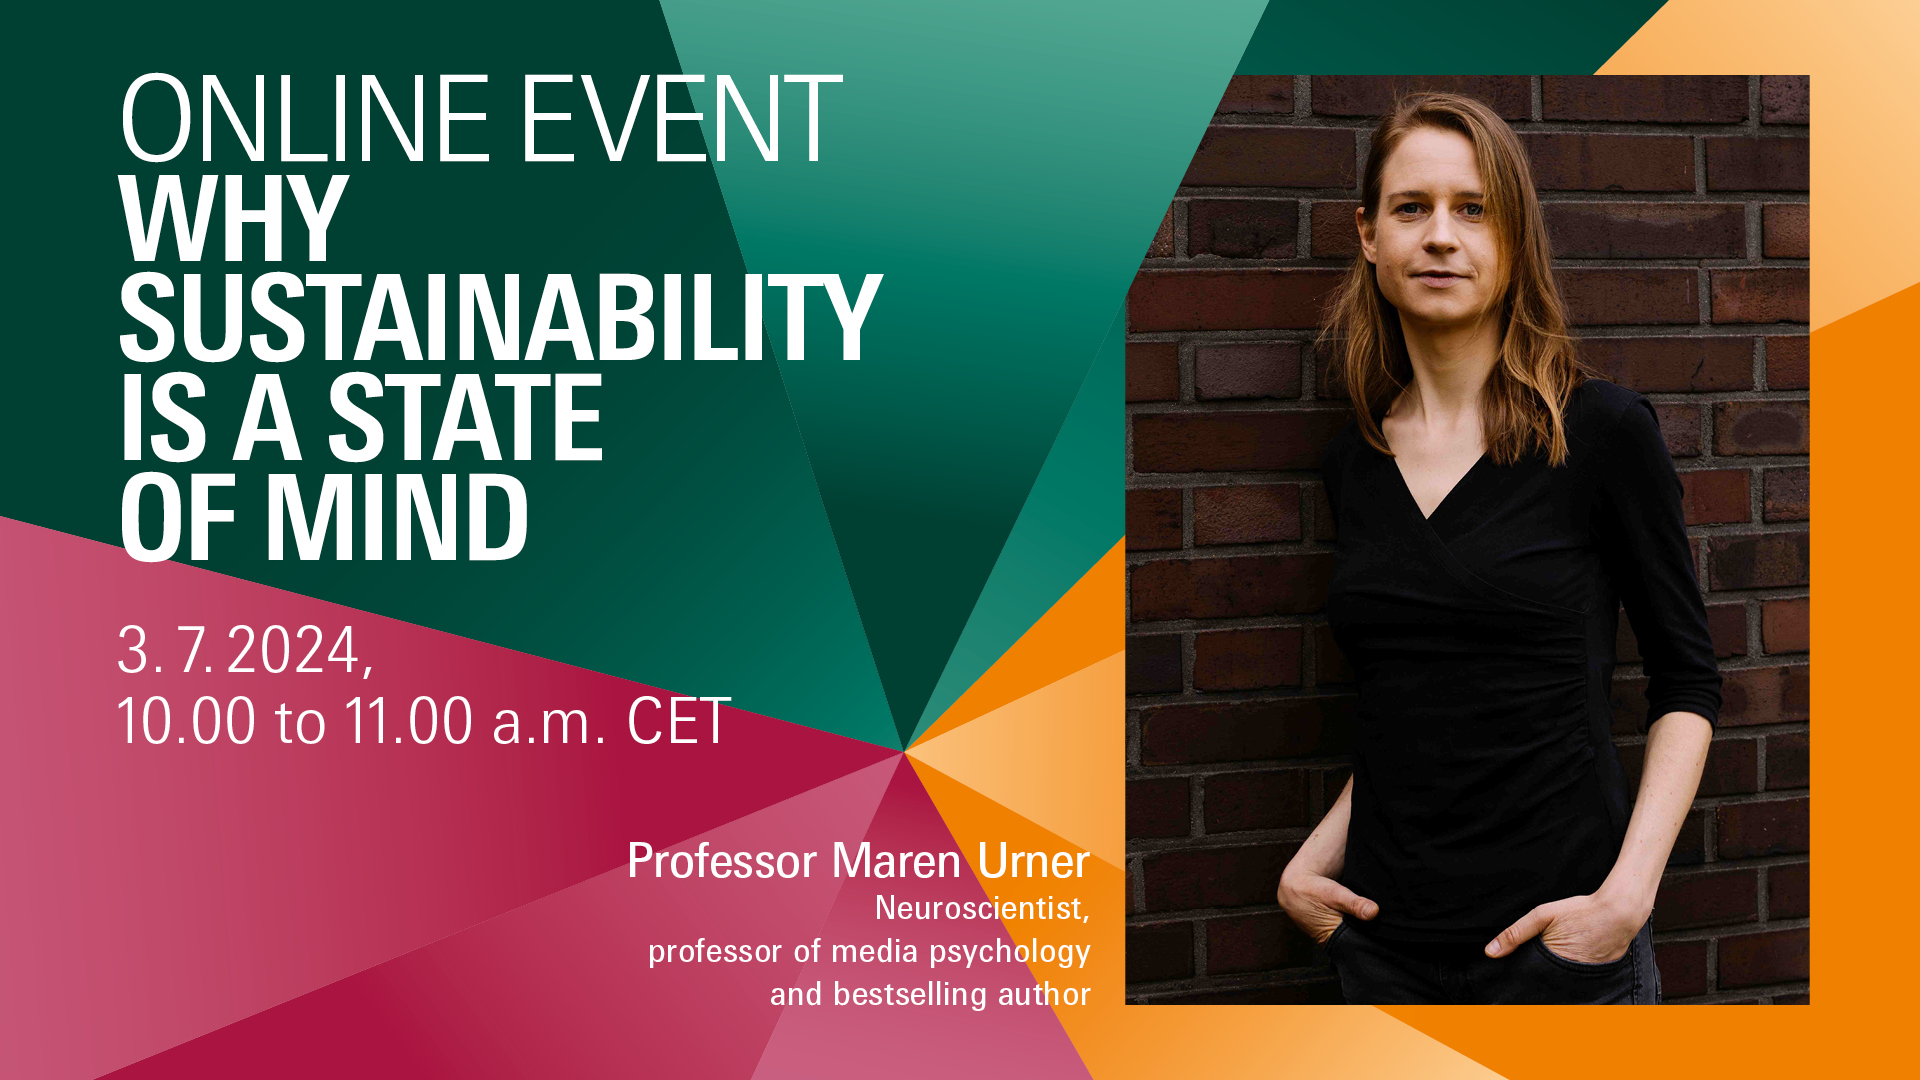 Online event "Why sustainability is a state of mind" with Professor Maren Urner